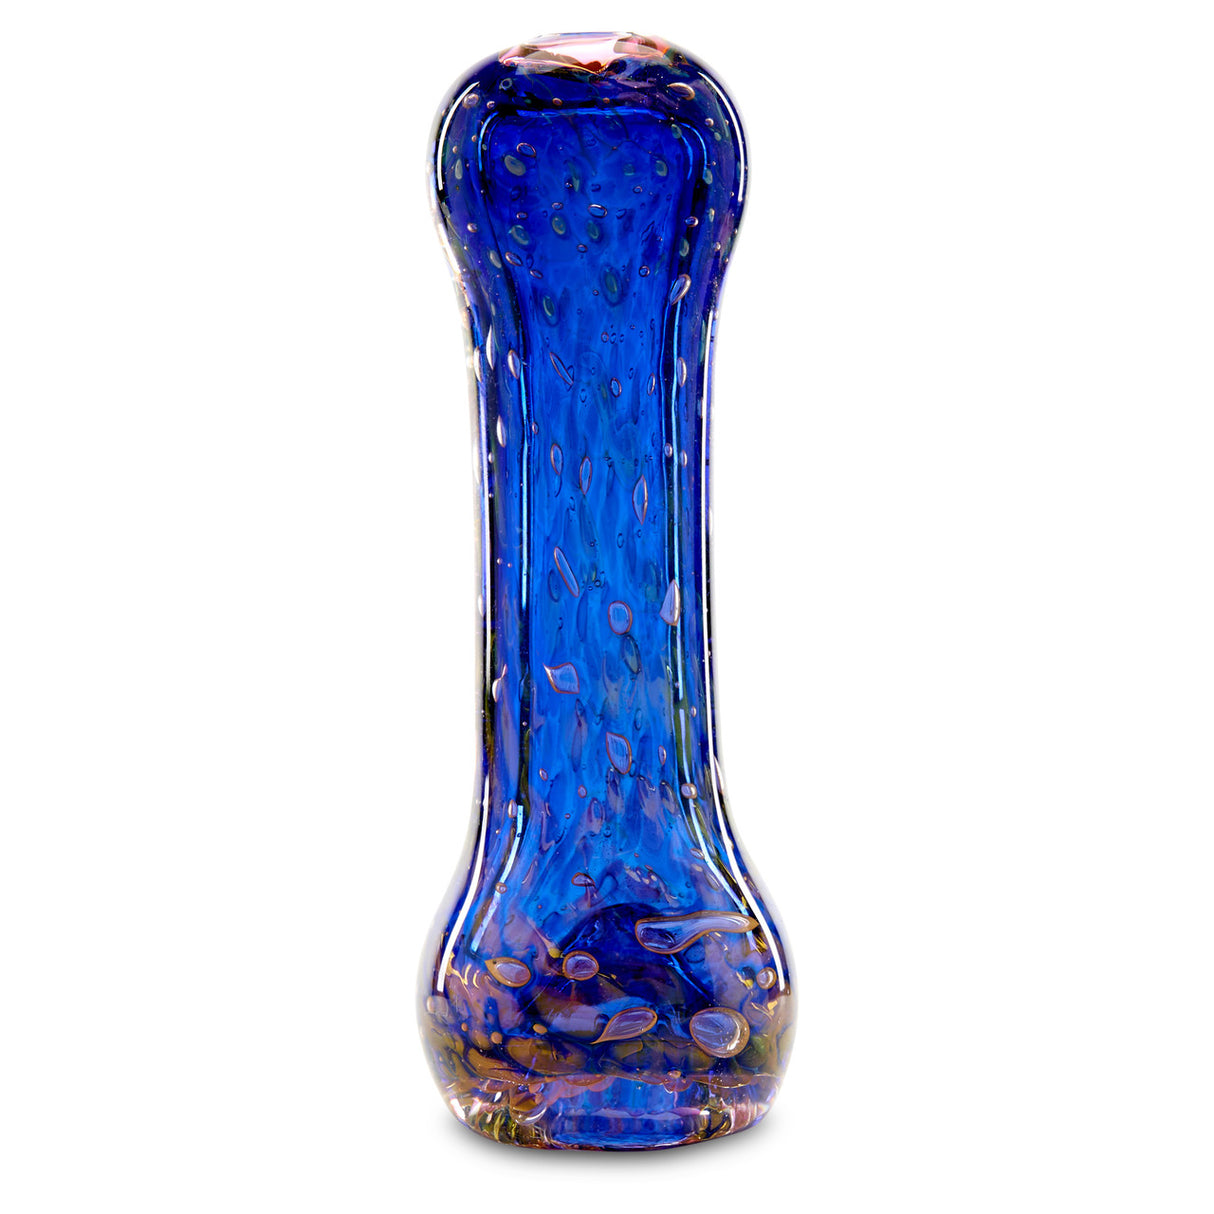 Chillum Fire and Ice One Hitter standing